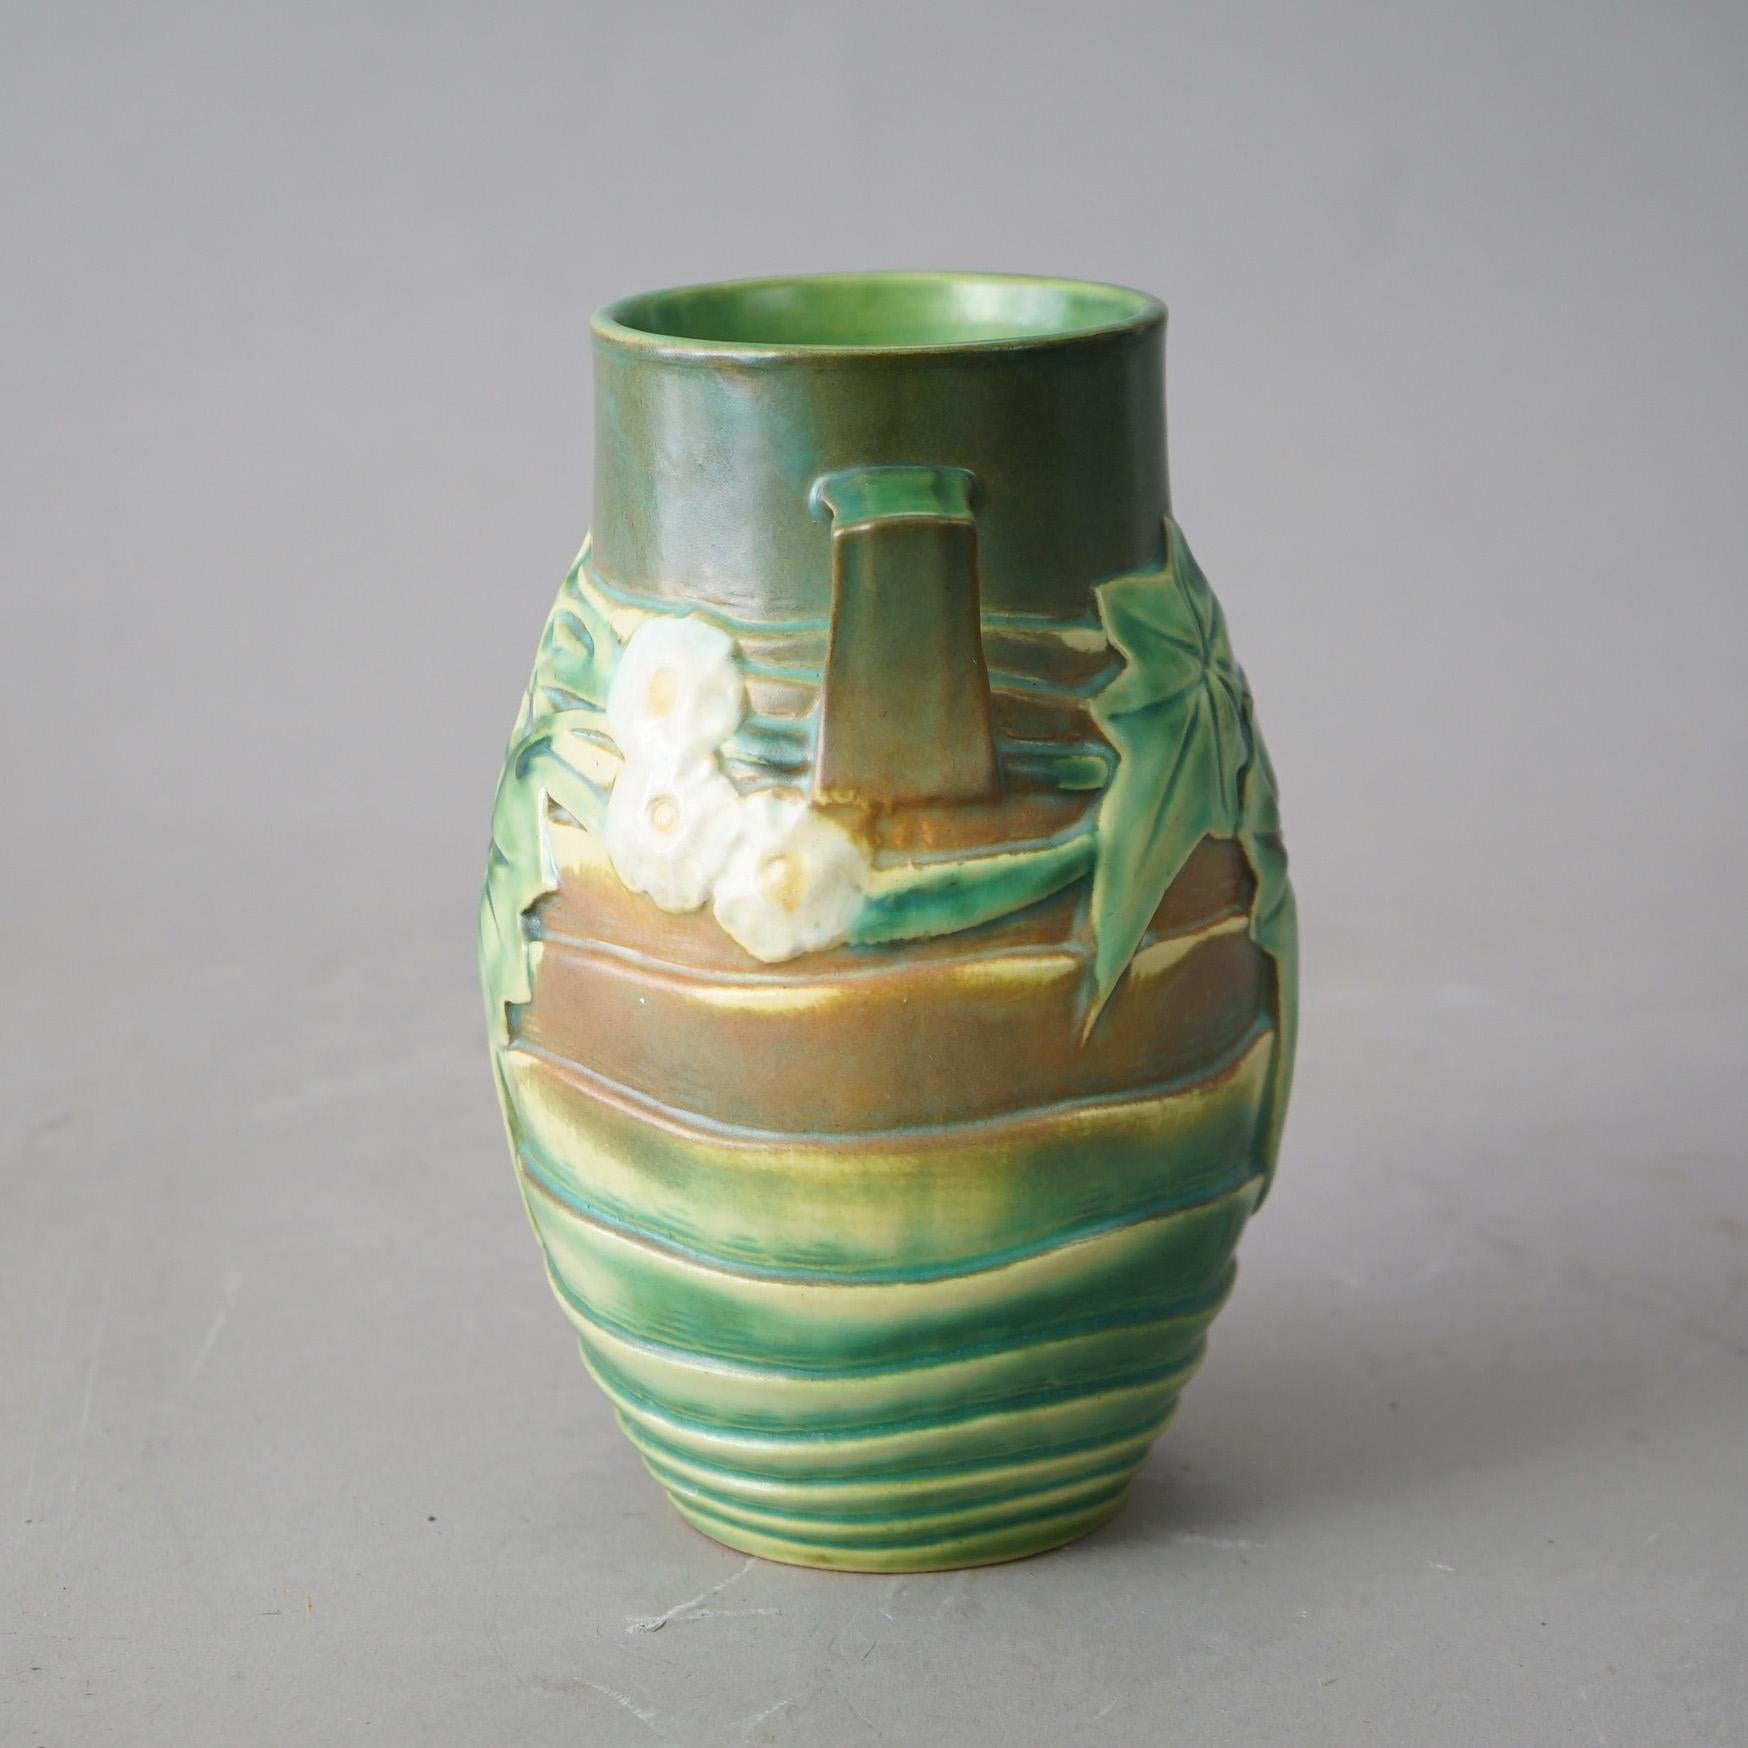 An antique Arts and Crafts vase by Roseville offers art pottery construction in green Luffa pattern with double handles and flowers with leaves, c1930

Measures - 8.25